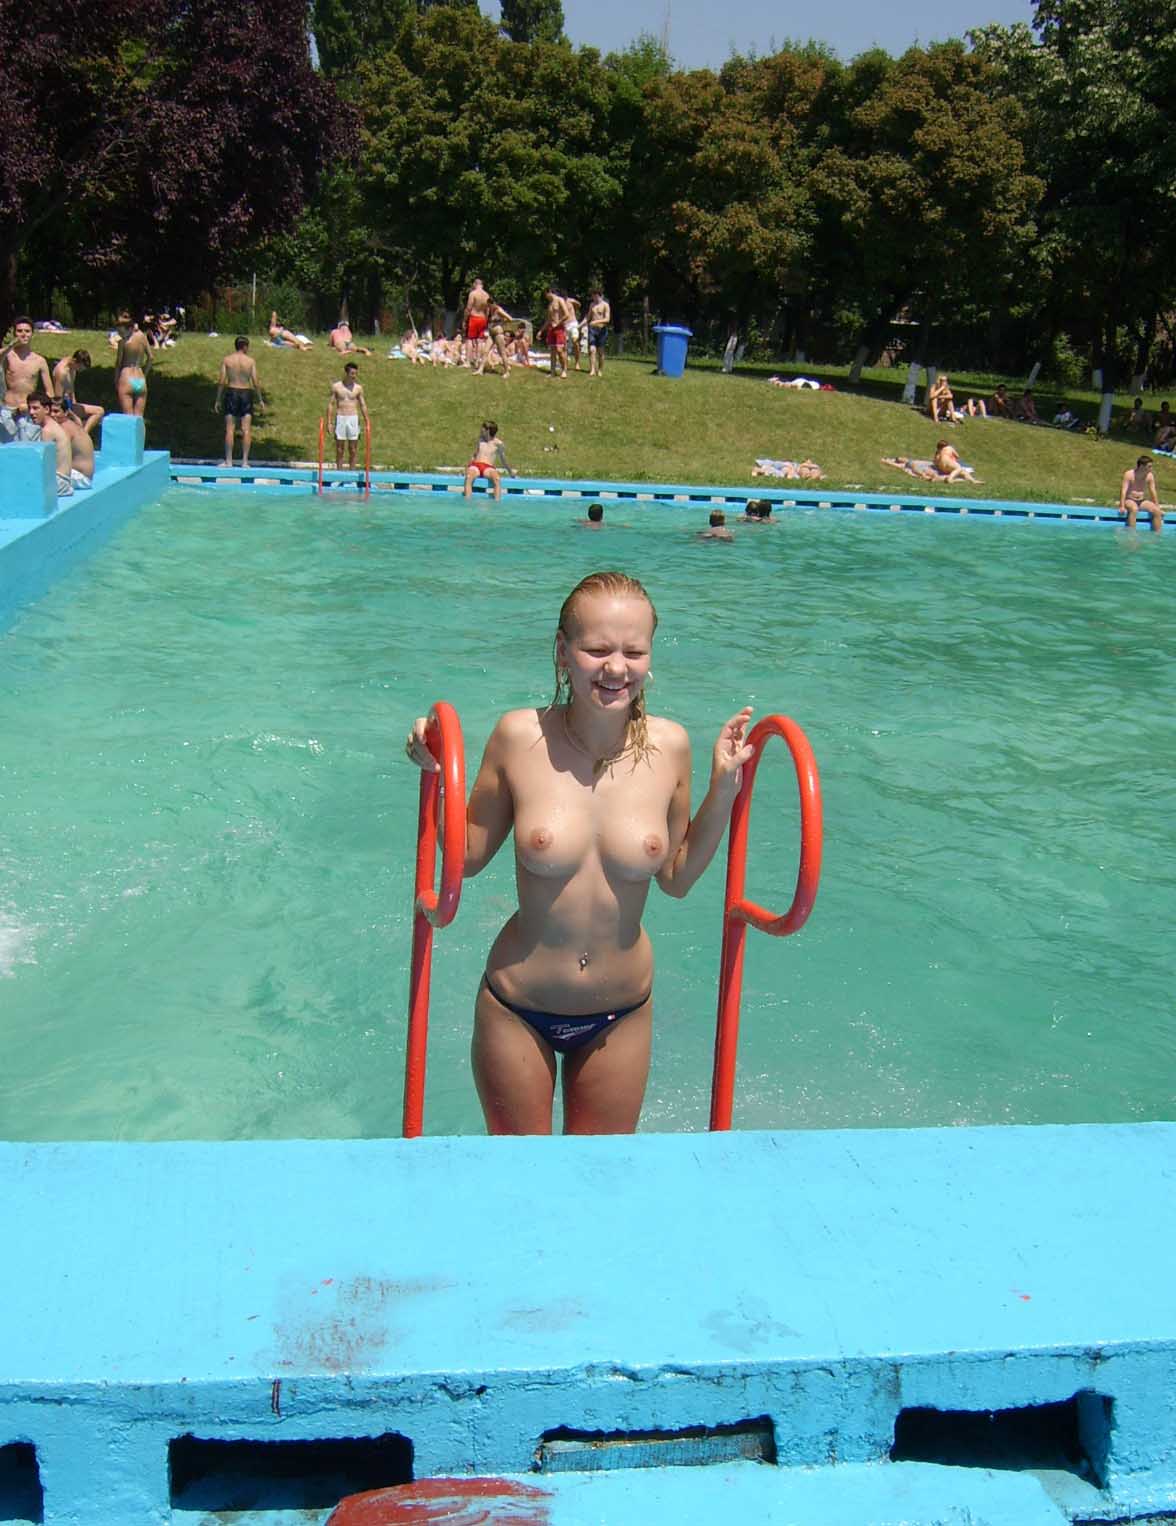 Public pool topless image